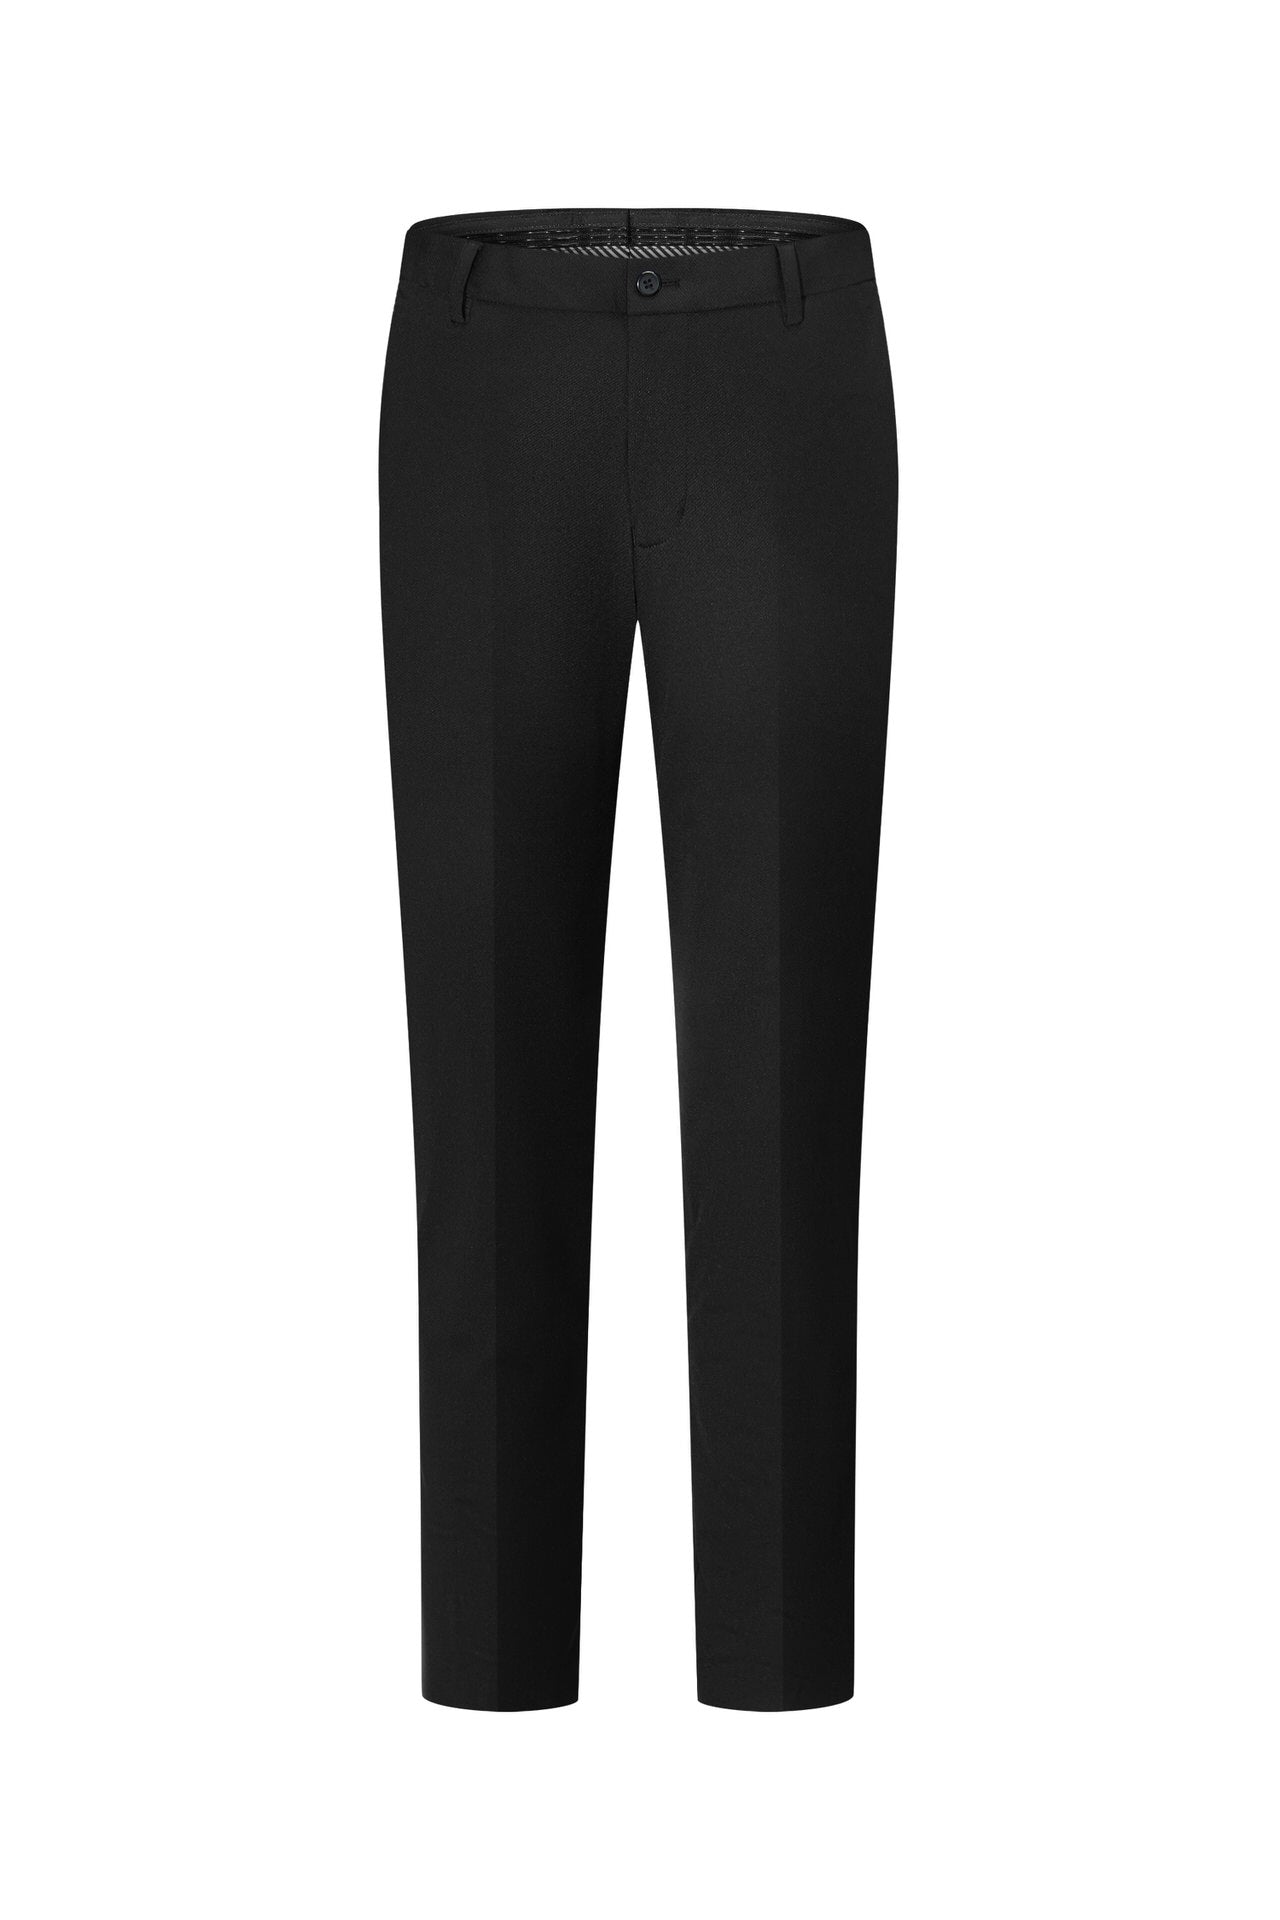 Multi-Way Ultra Stretch Formal Pants in Elastic Smart Fit